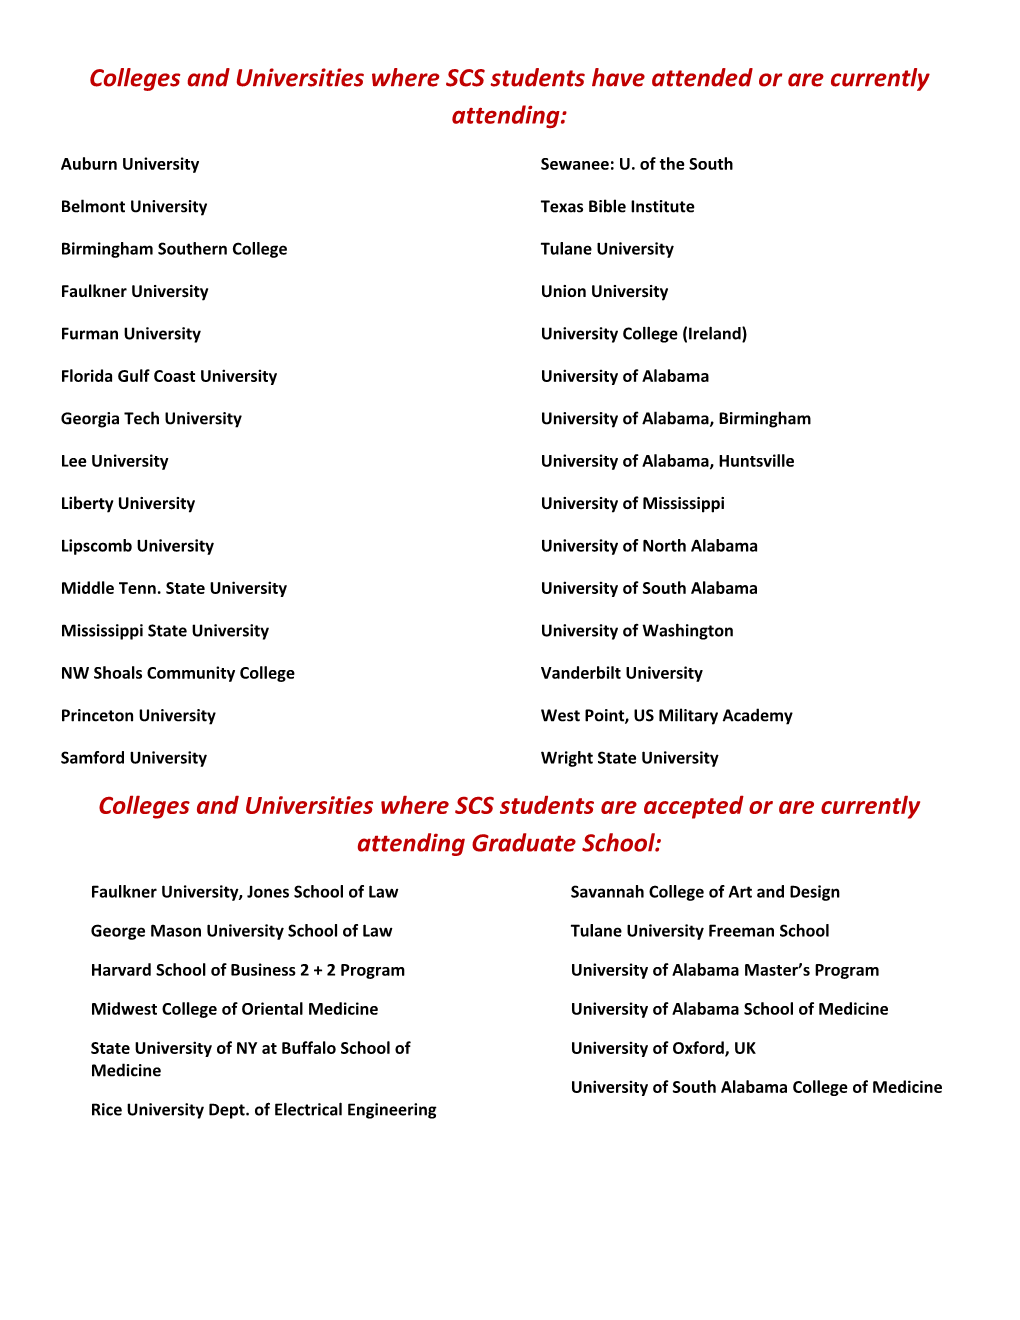 Colleges and Universities Where SCS Students Have Attended Or Are Currently Attending